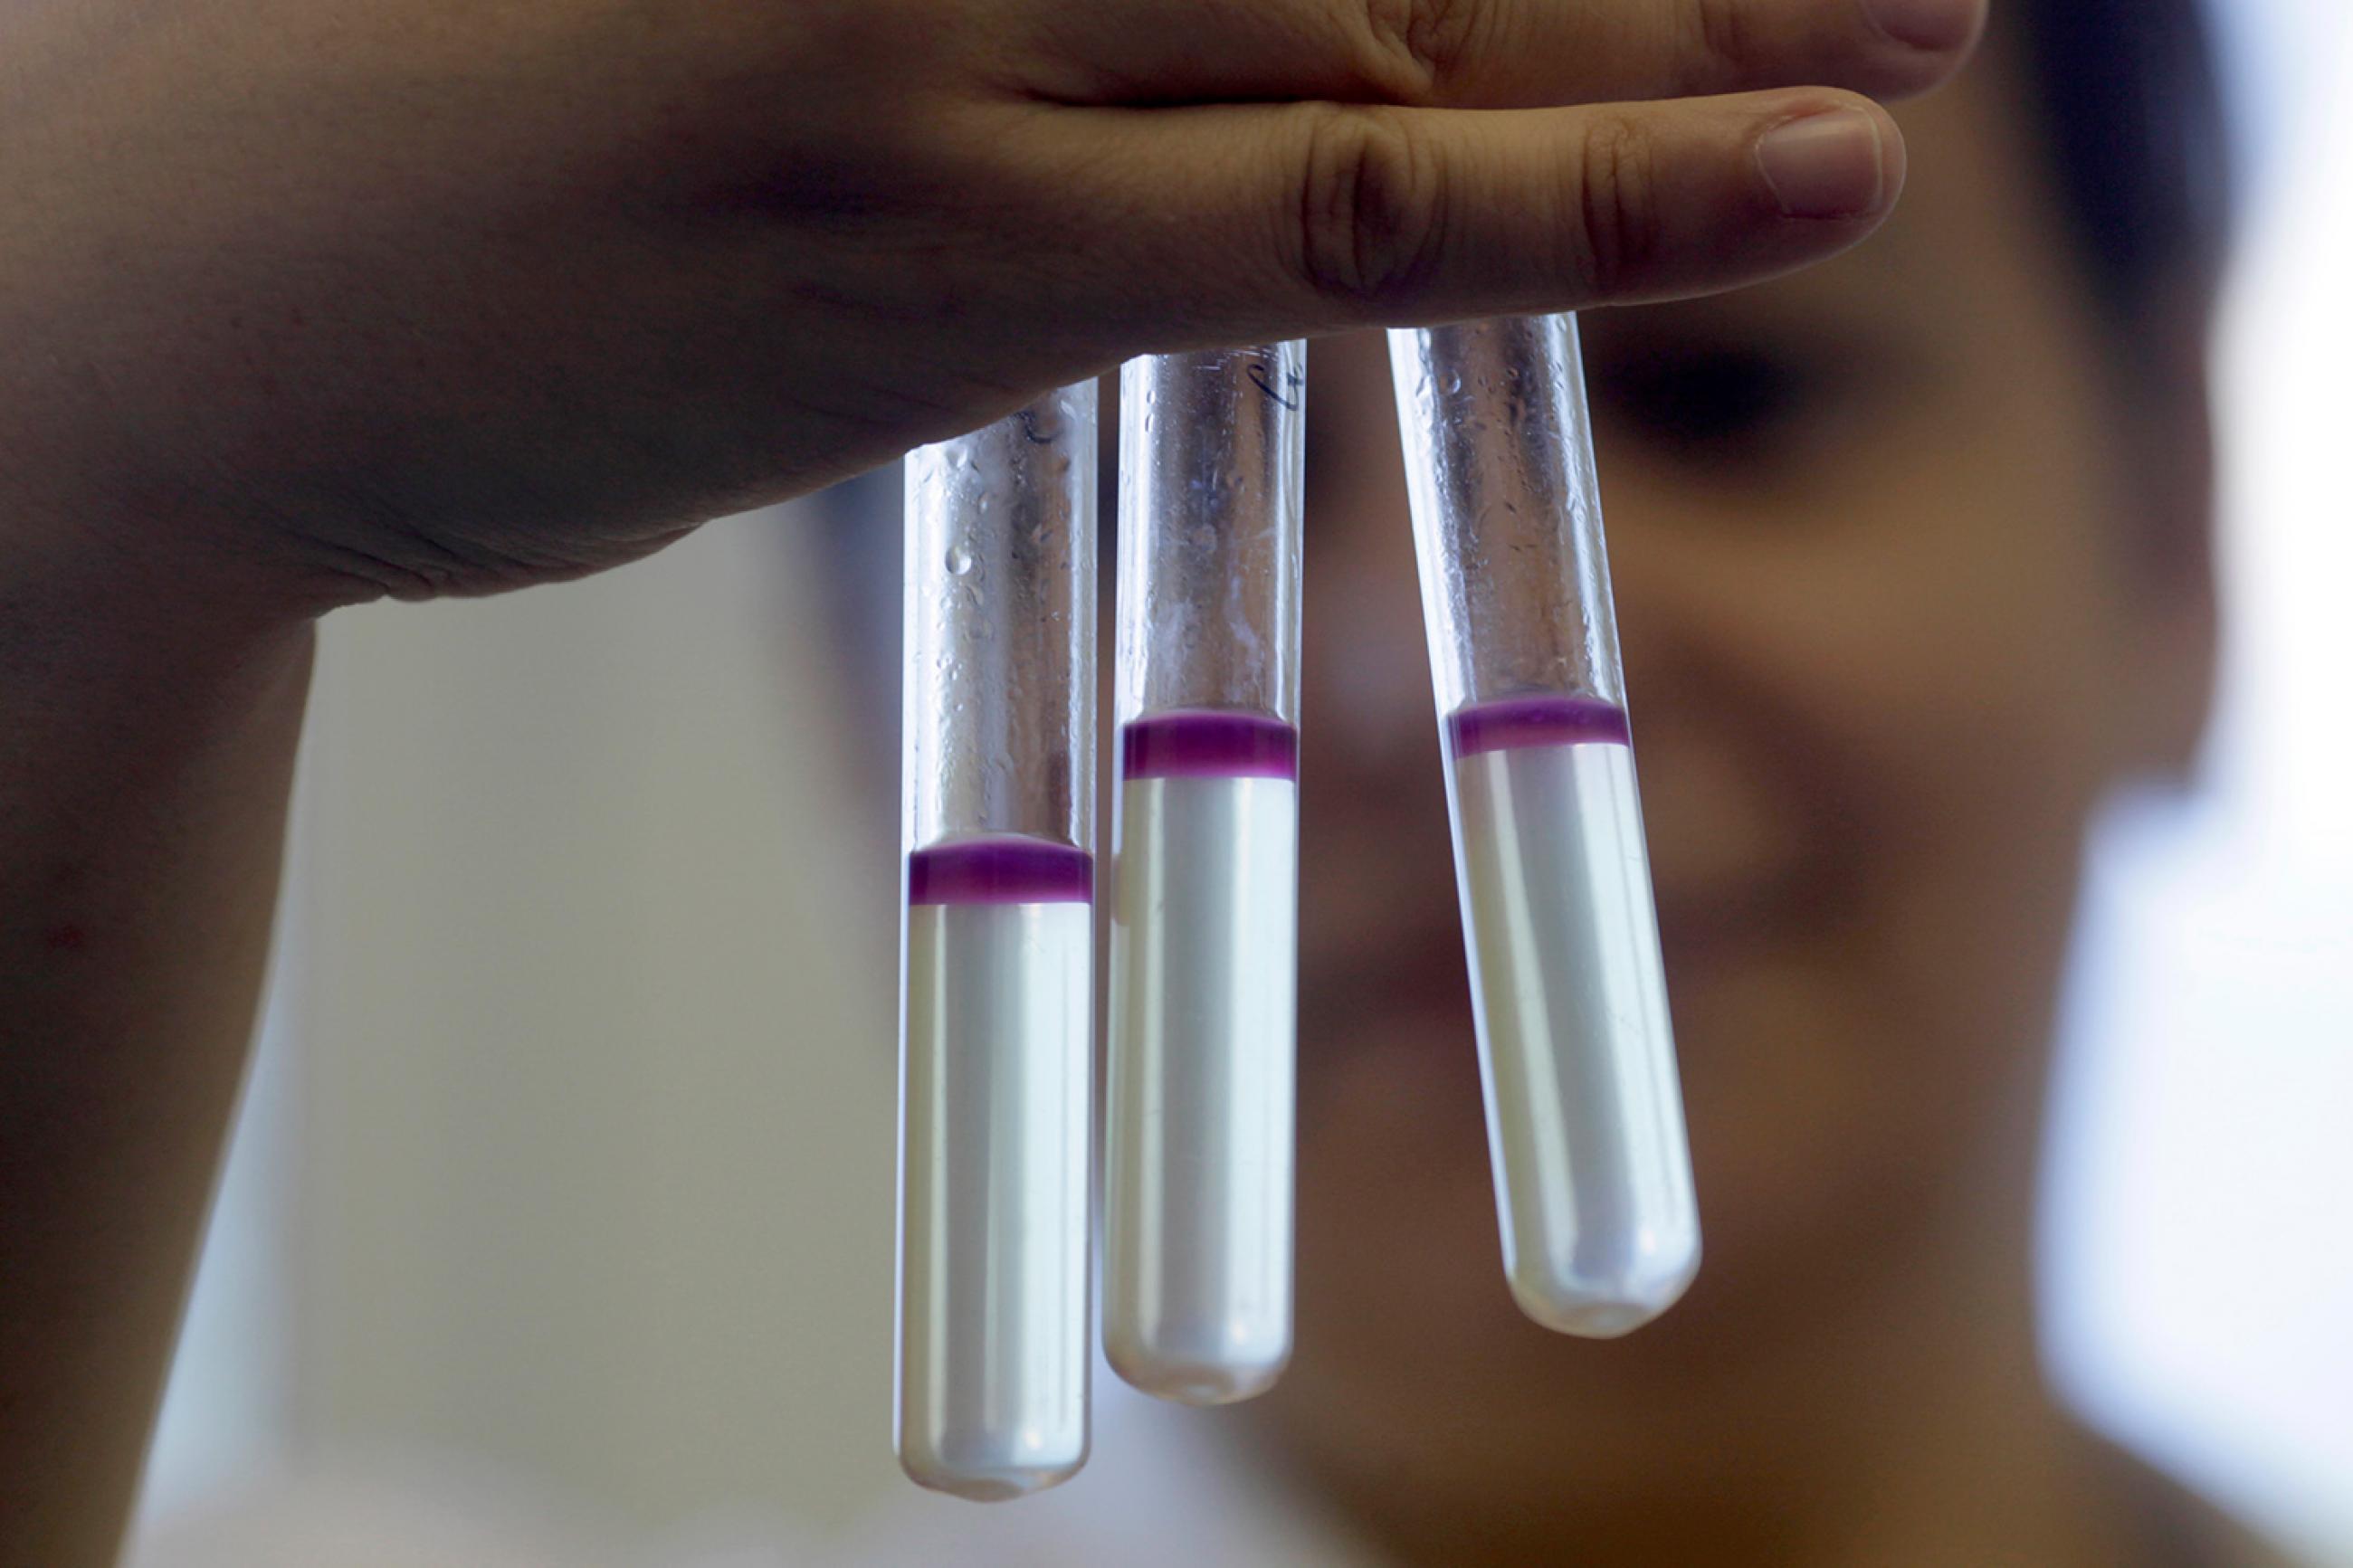 Researcher Marina Soloviecika holds tubes of a deadly strain of E.coli isolated during an outbreak in Riga, Latvia on June 9, 2011. Many other types of bacteria live safely in or on the human body. The image shows a few testtubes filled with liquid that has a very distinctive purple “lid.” The researcher can be seen blurred out in the background. REUTERS/Ints Kalnins